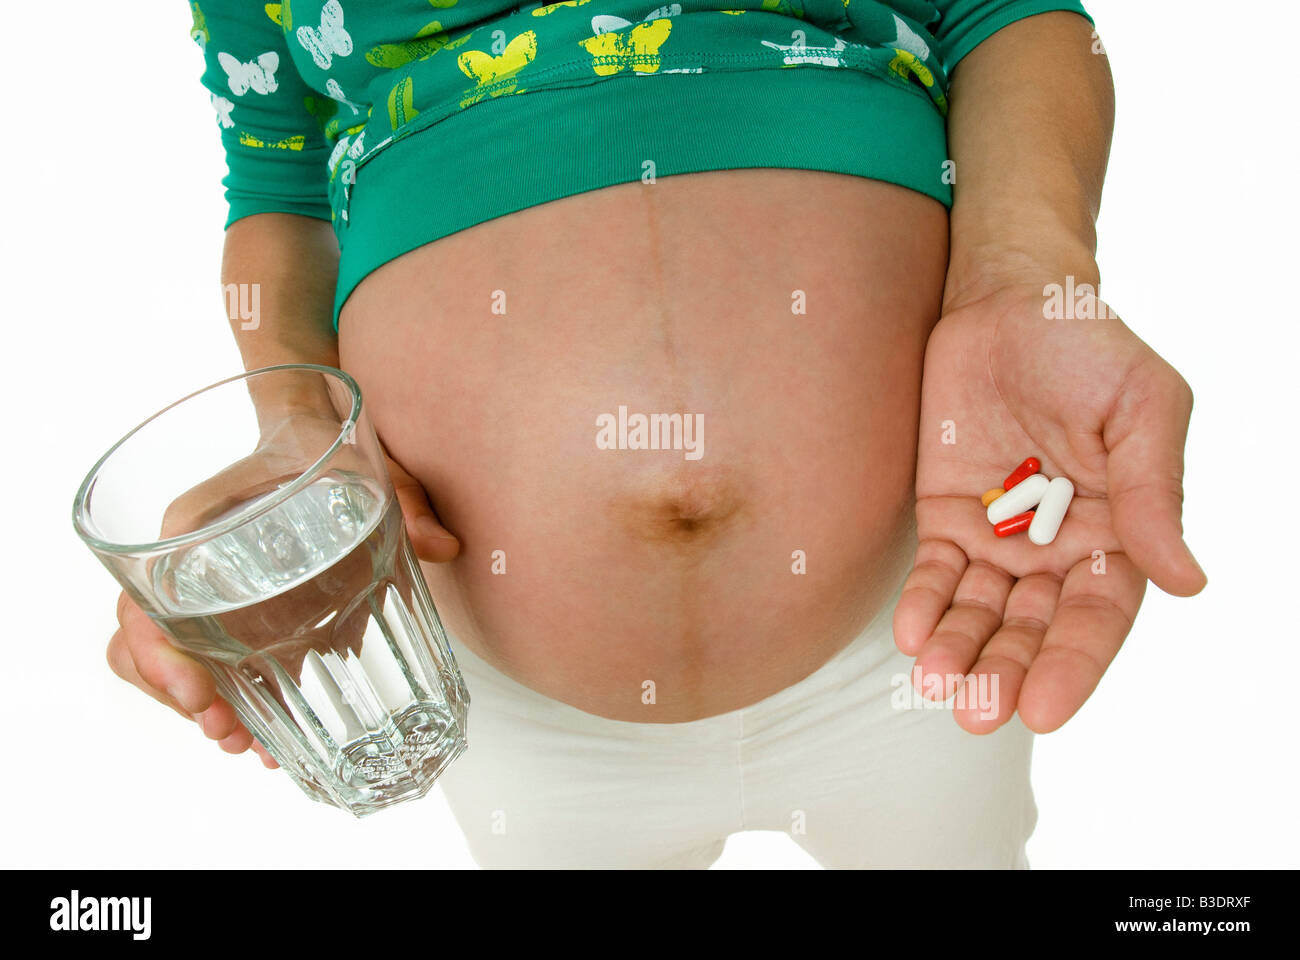 PREGNANT WOMAN HOLDING VITAMIN PILLS AND GLASS OF WATER Stock Photo